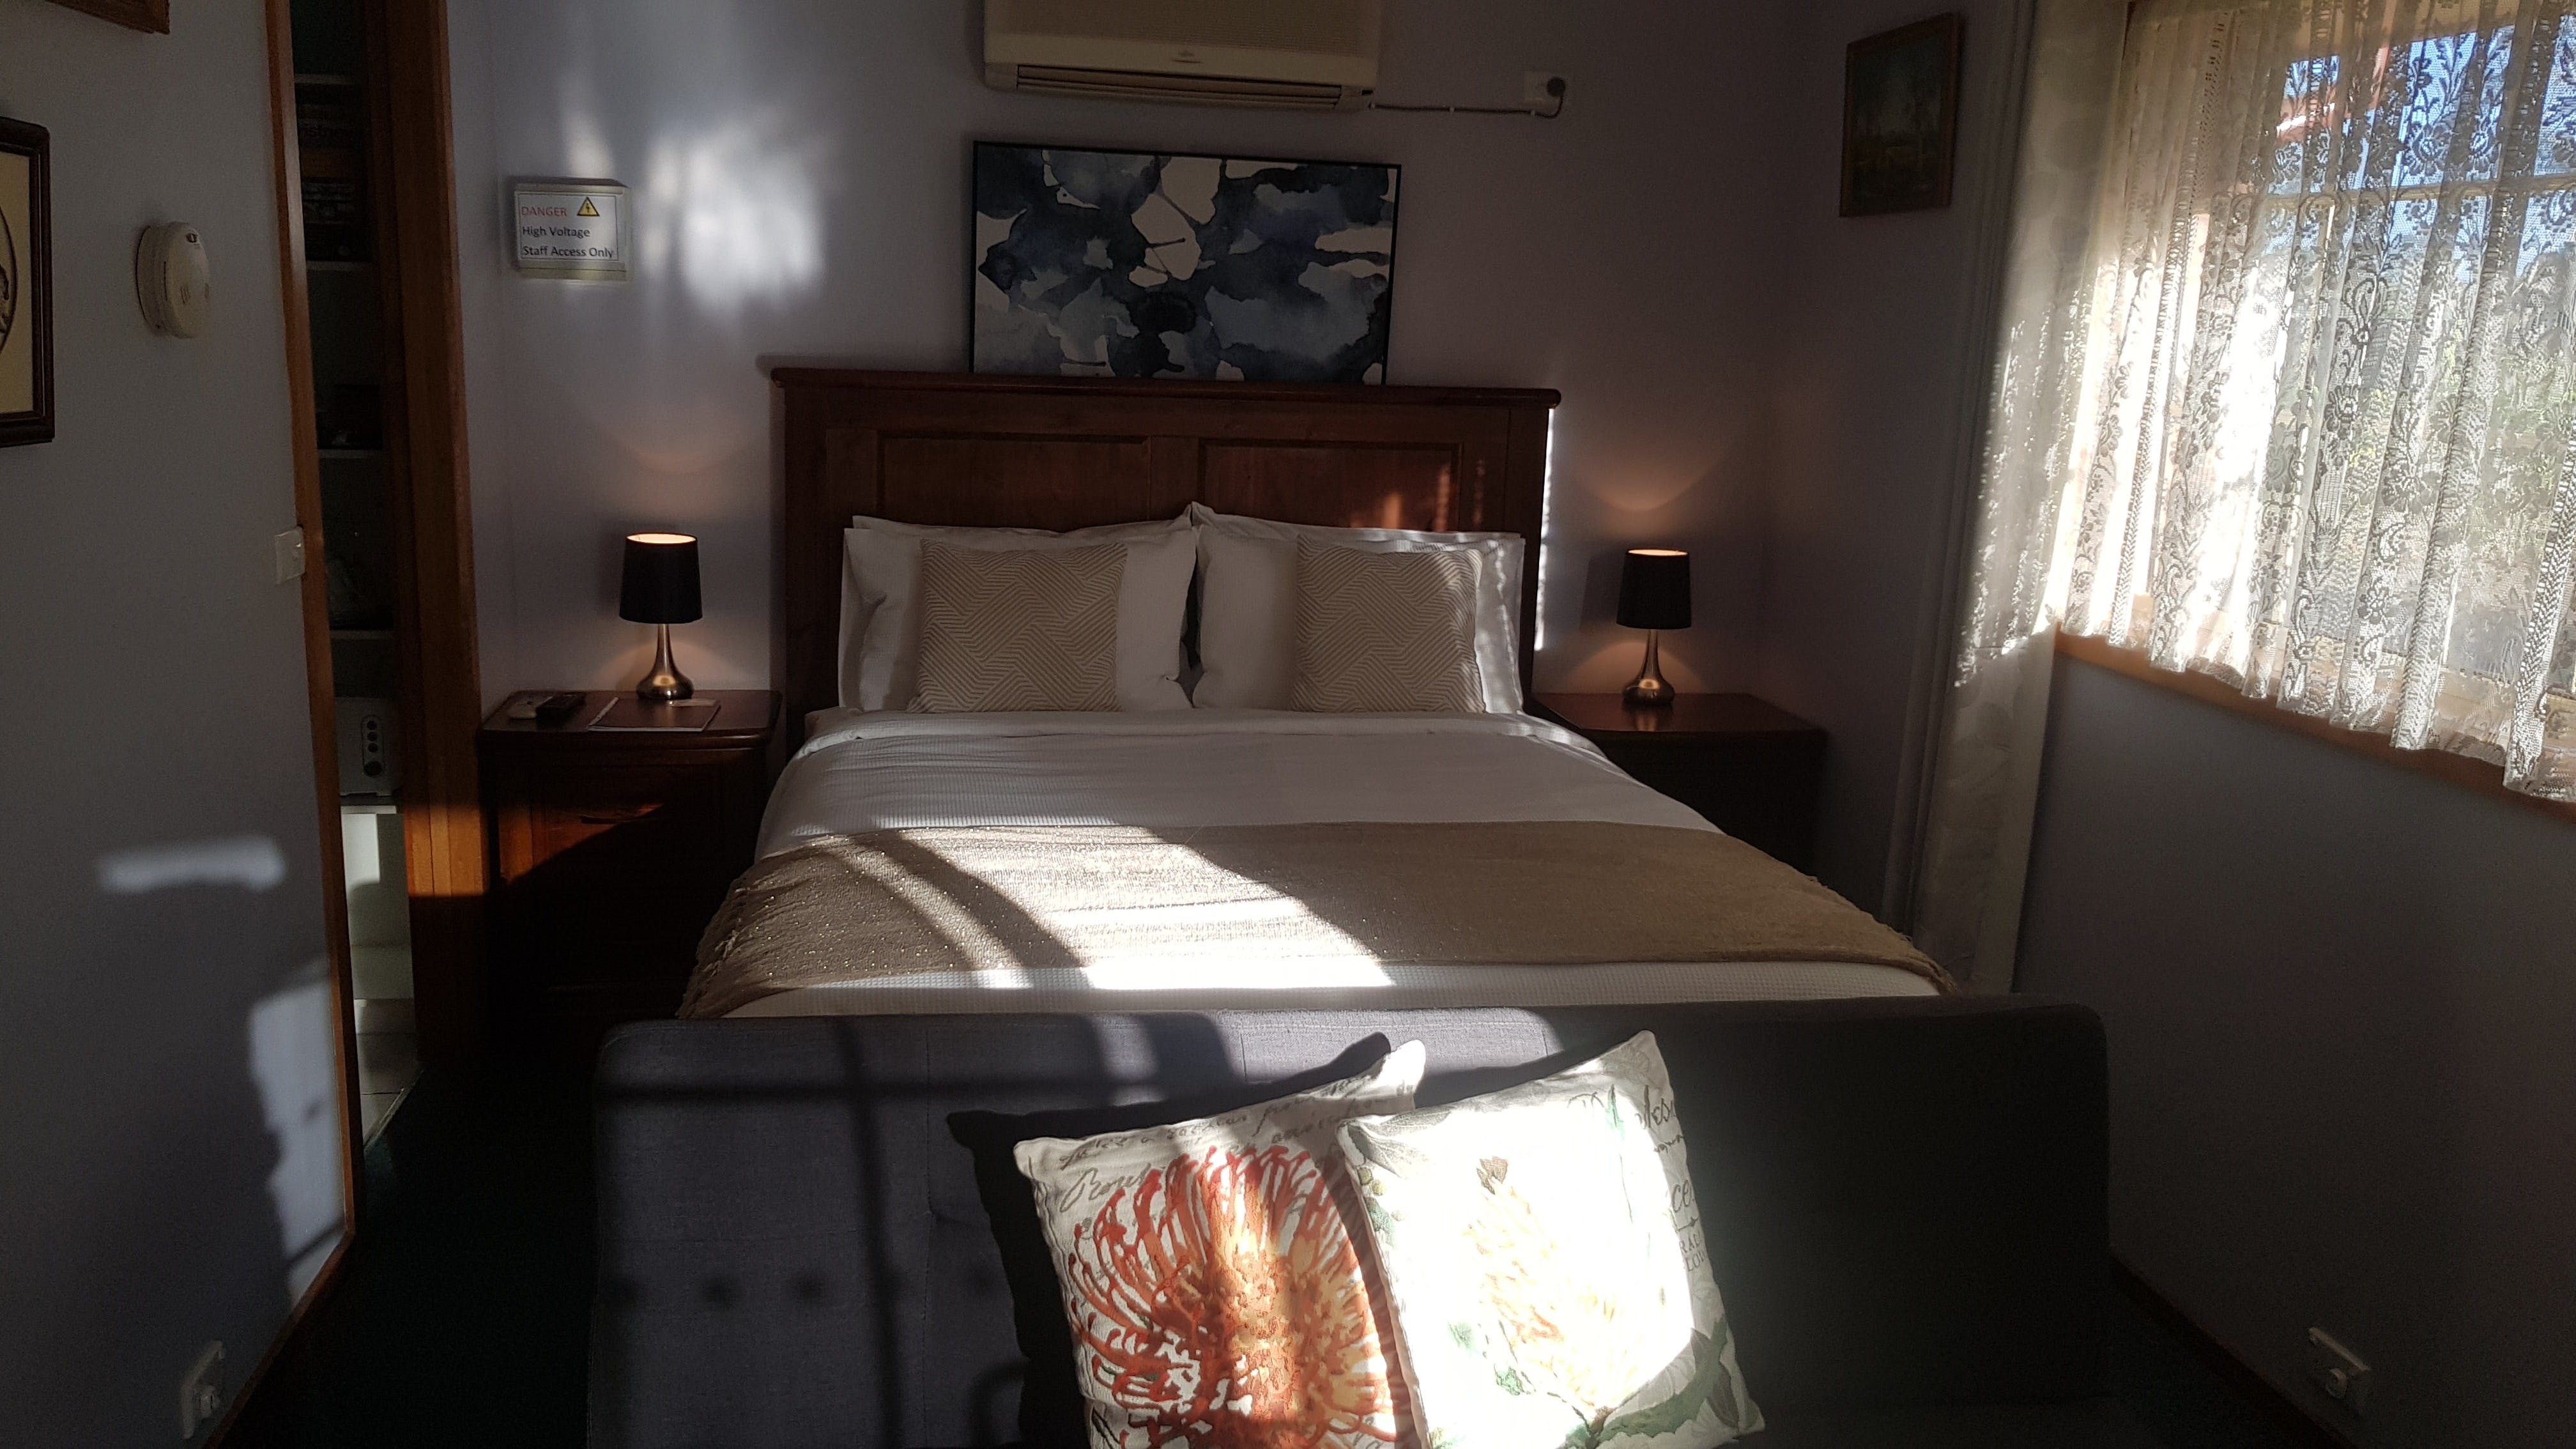 Factory Lane Bed & Breakfast - Accommodation Bookings 1